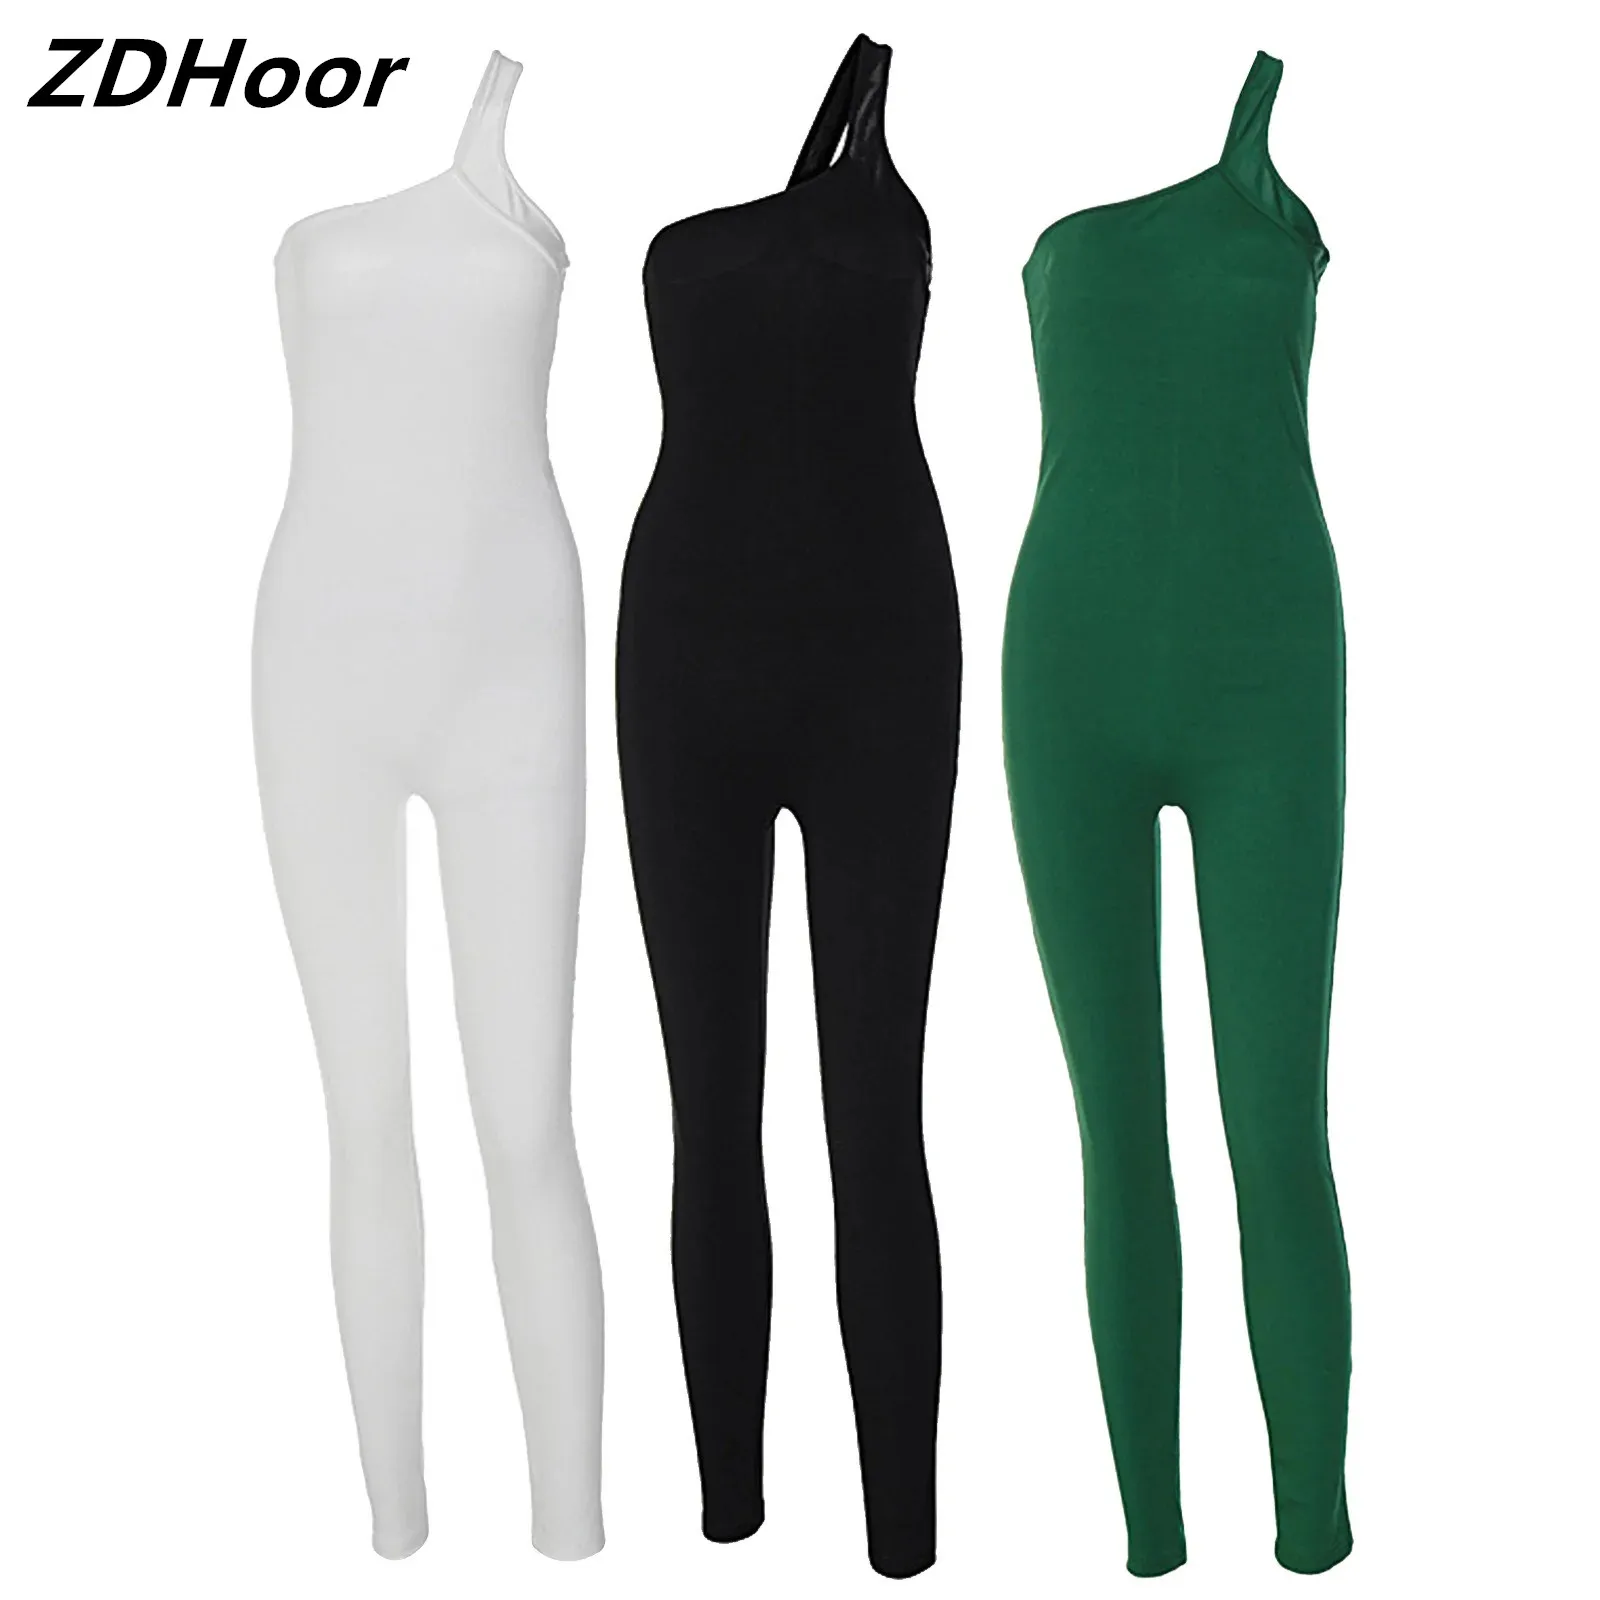 

Women Gymnastic Jumpsuits Shoulder Sleeveless Seamless Tight Long Jumpsuit Stretchy Bodysuit for Yoga Dance Overalls for Women